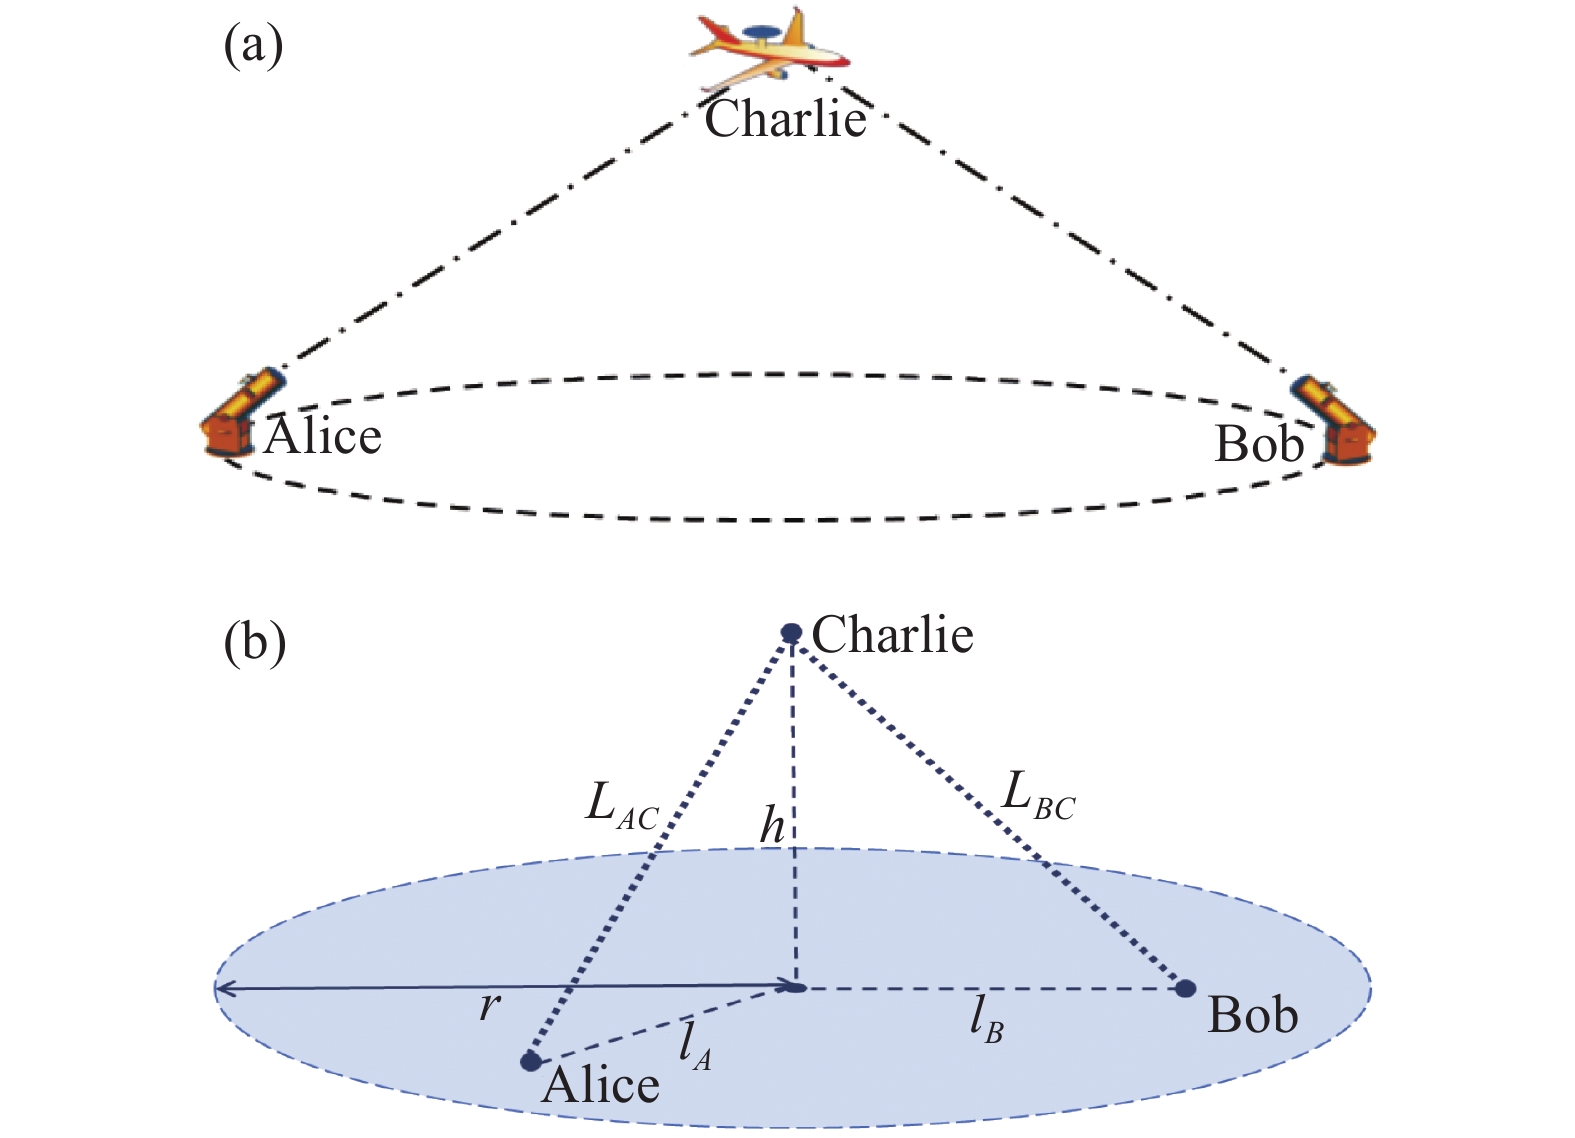 Application model of communication via flight repeater platform. (a) Application structure; (b) Geometry structure